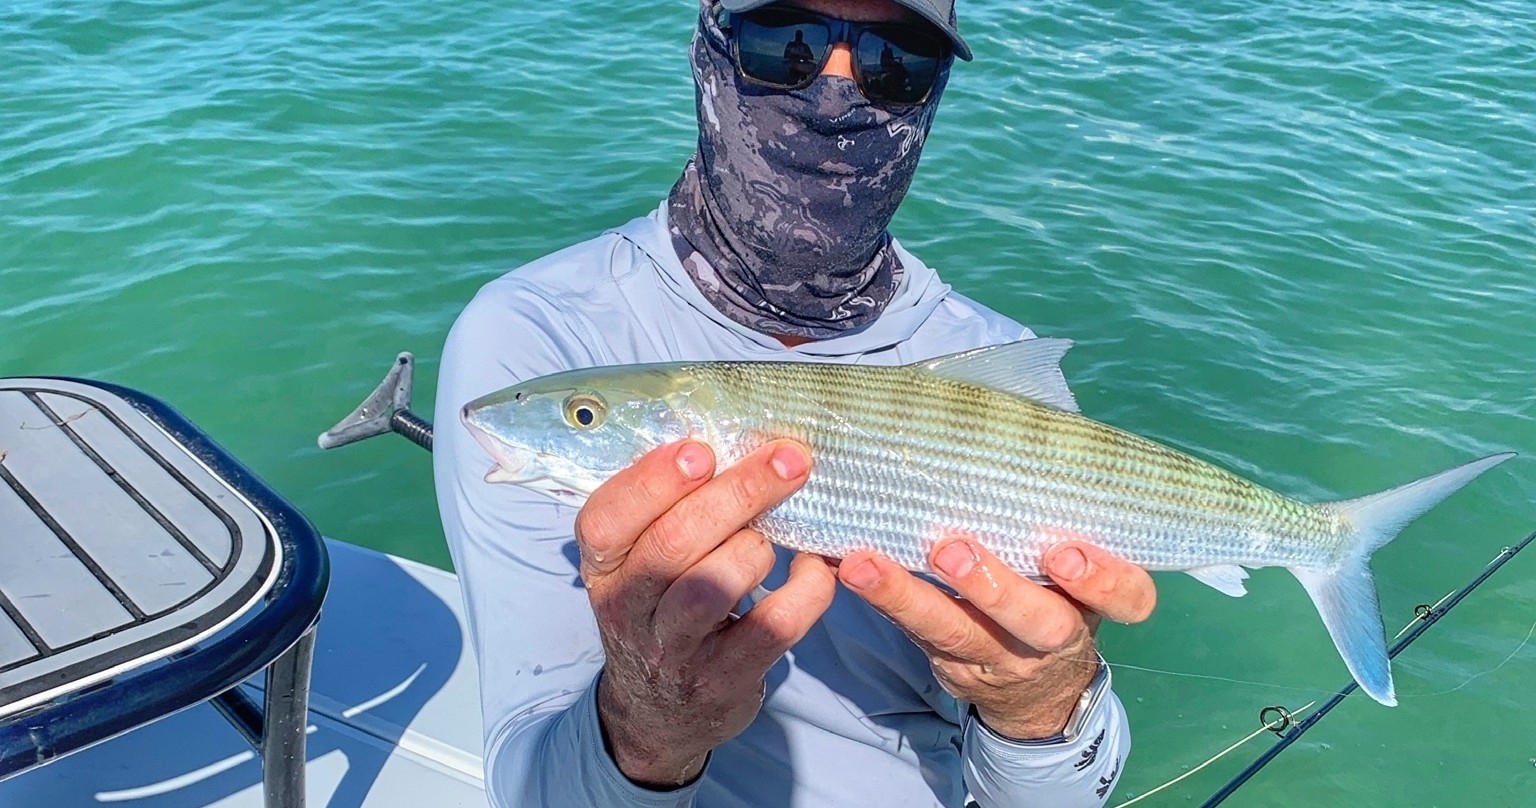 6-Hour Fishing Tour in Key West